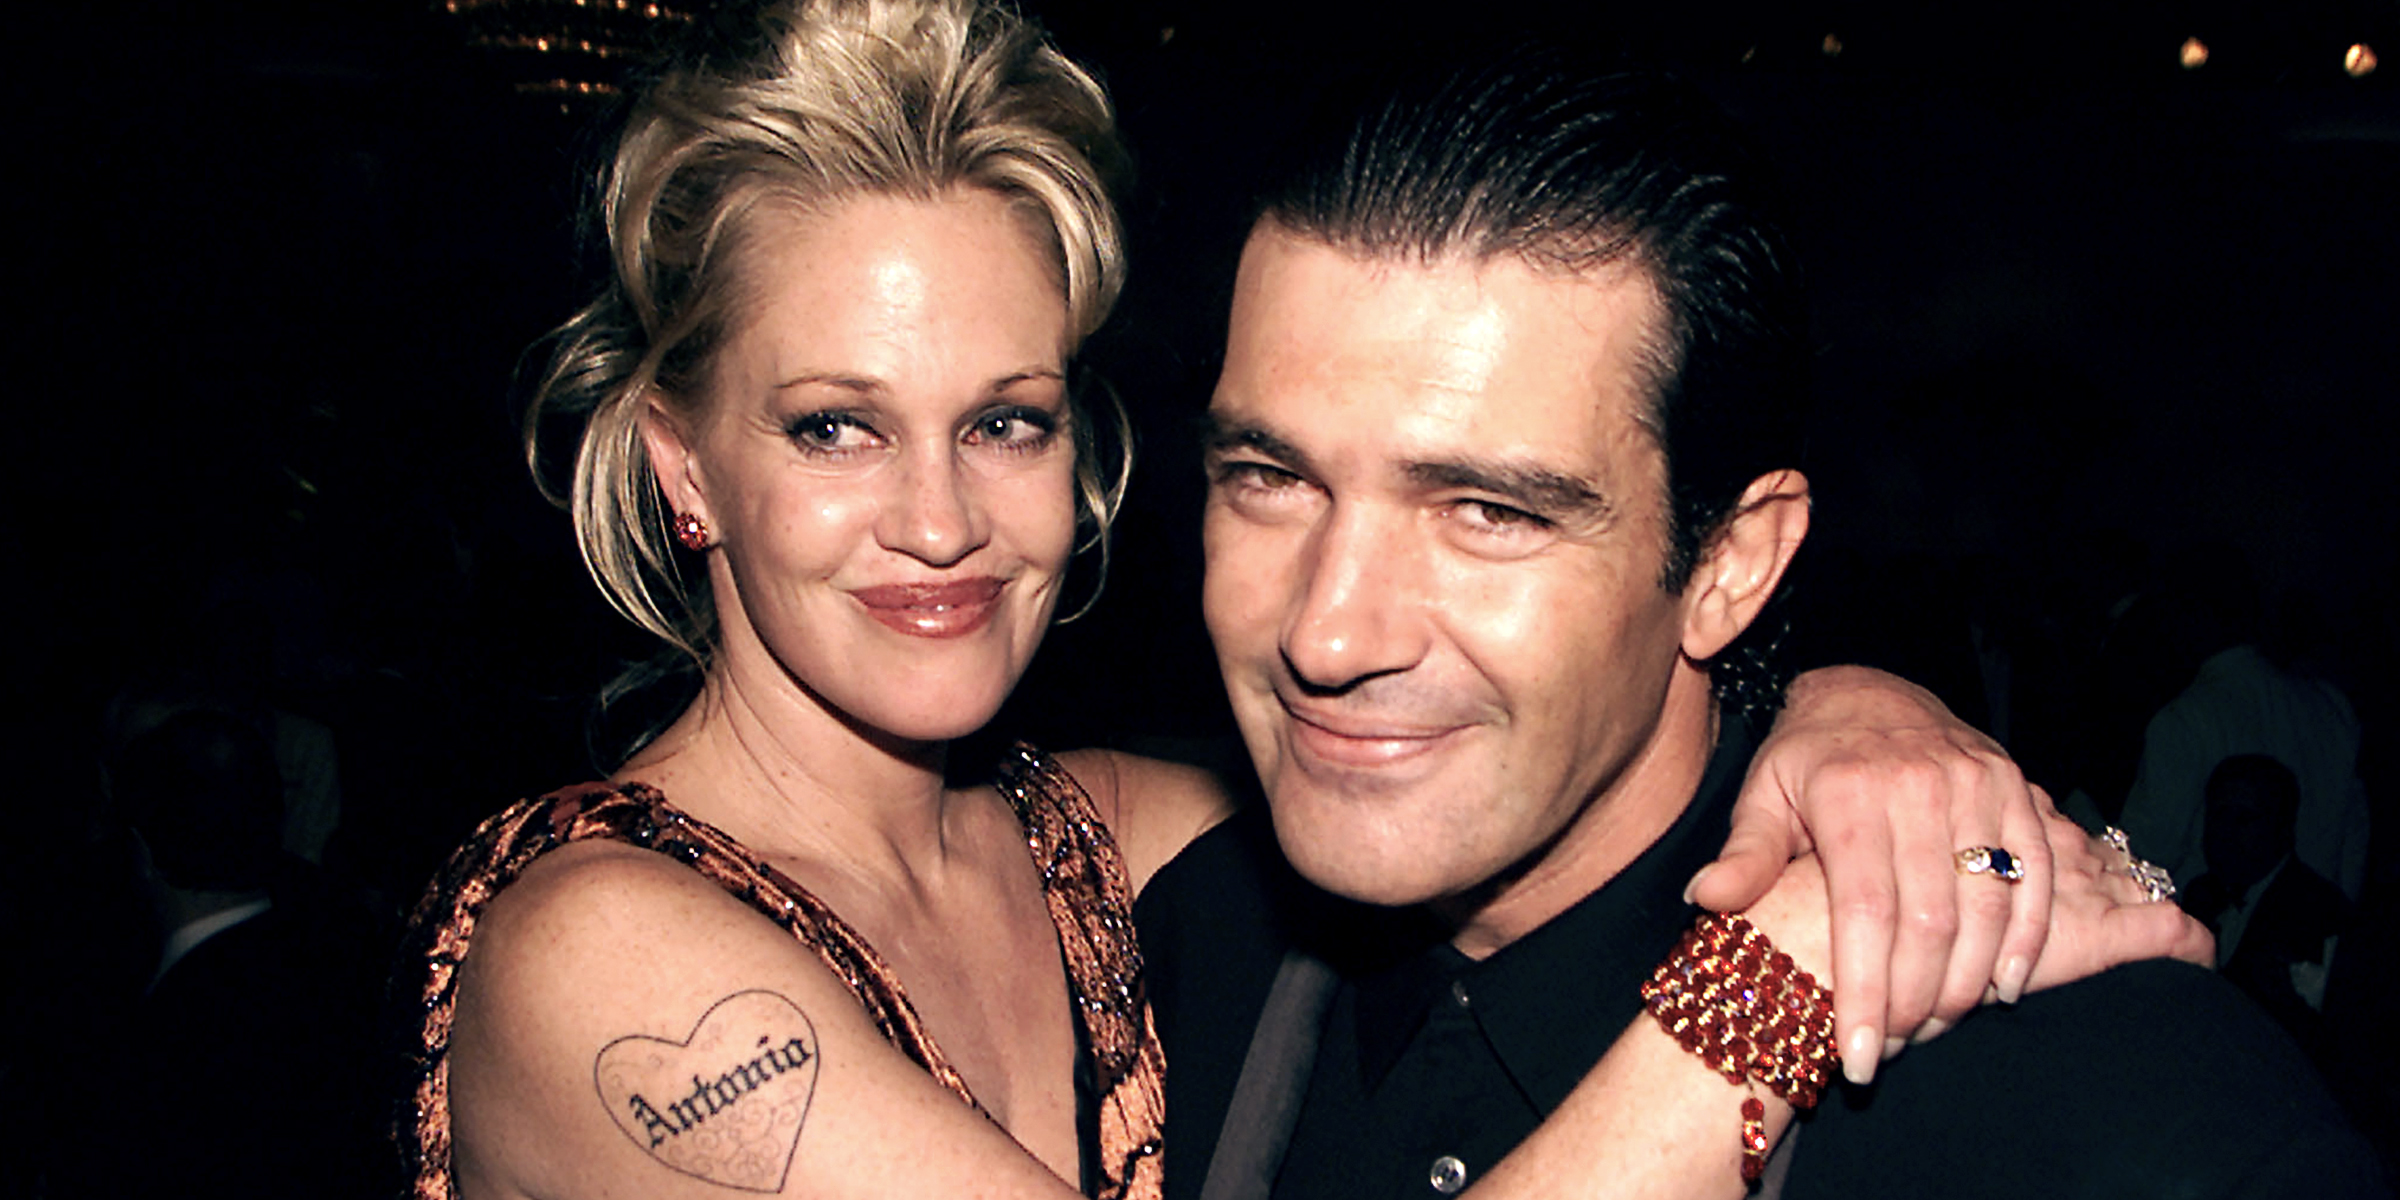 Melanie Griffith and Antonio Banderas | Source: Getty Images